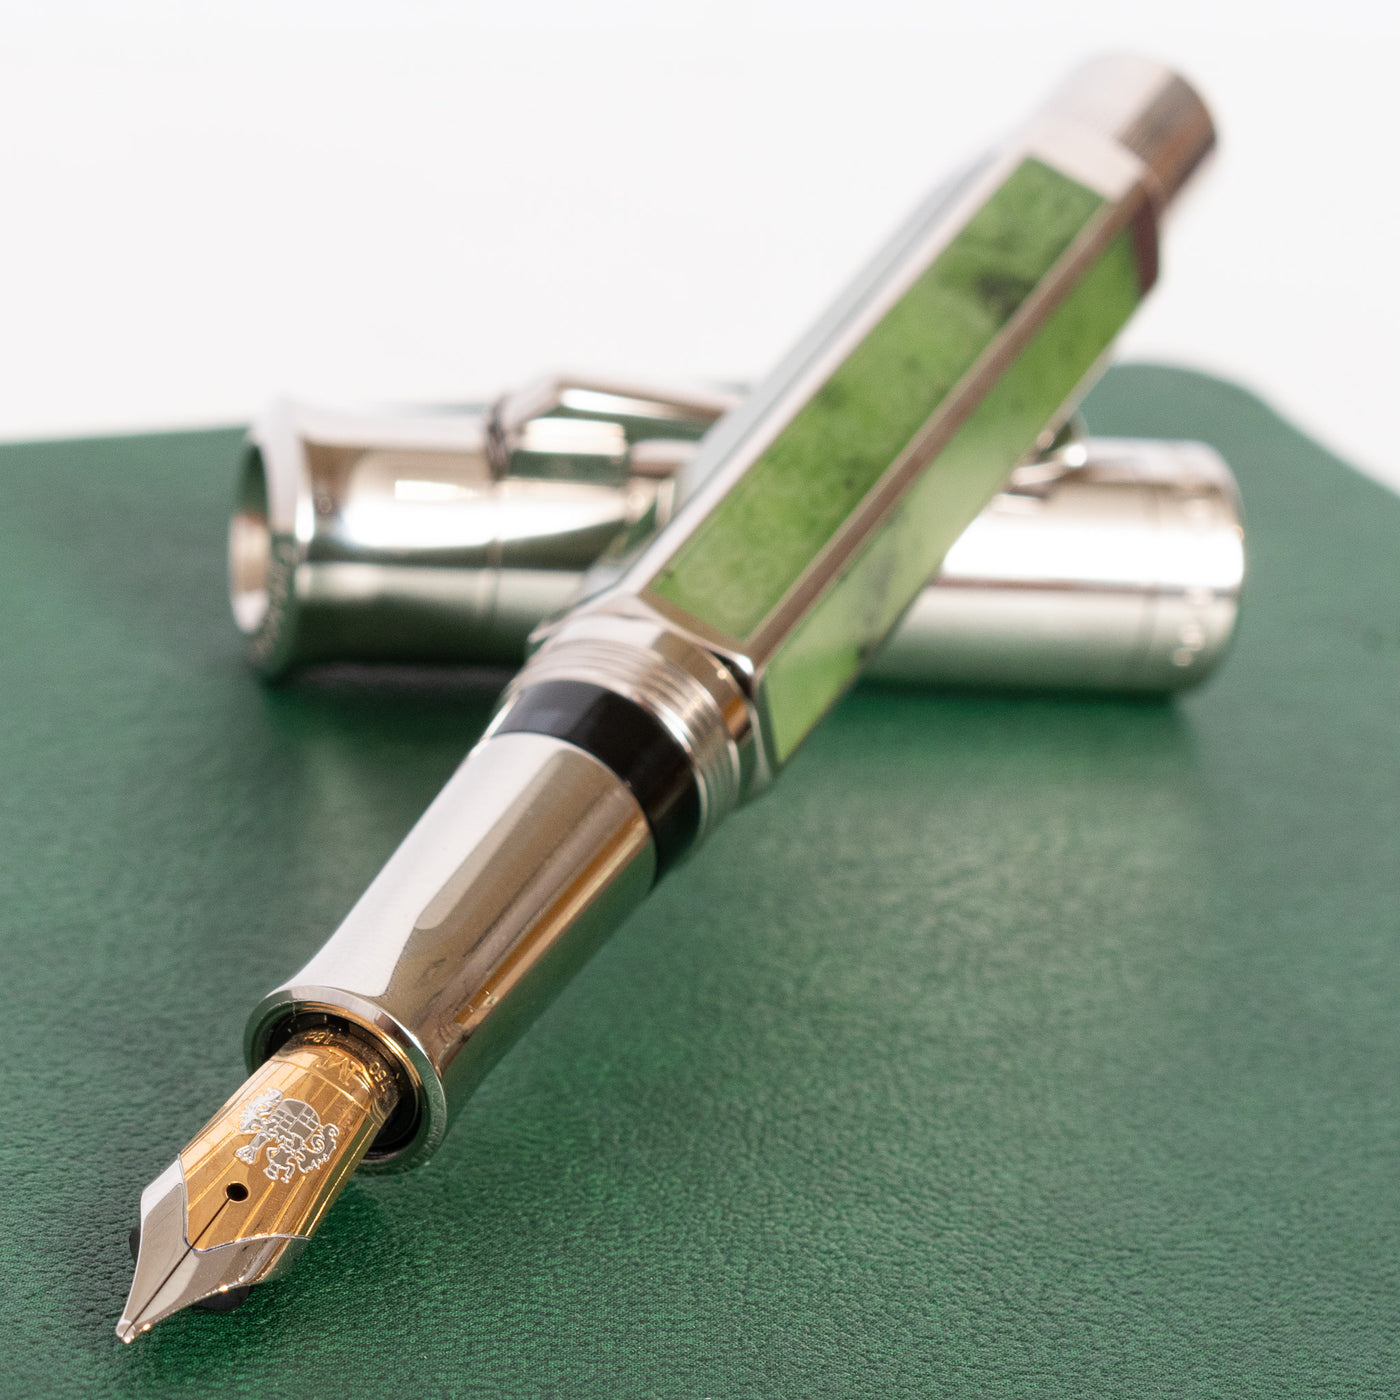 Graf von Faber-Castell Pen of the Year 2011 Jade Fountain Pen Uncapped